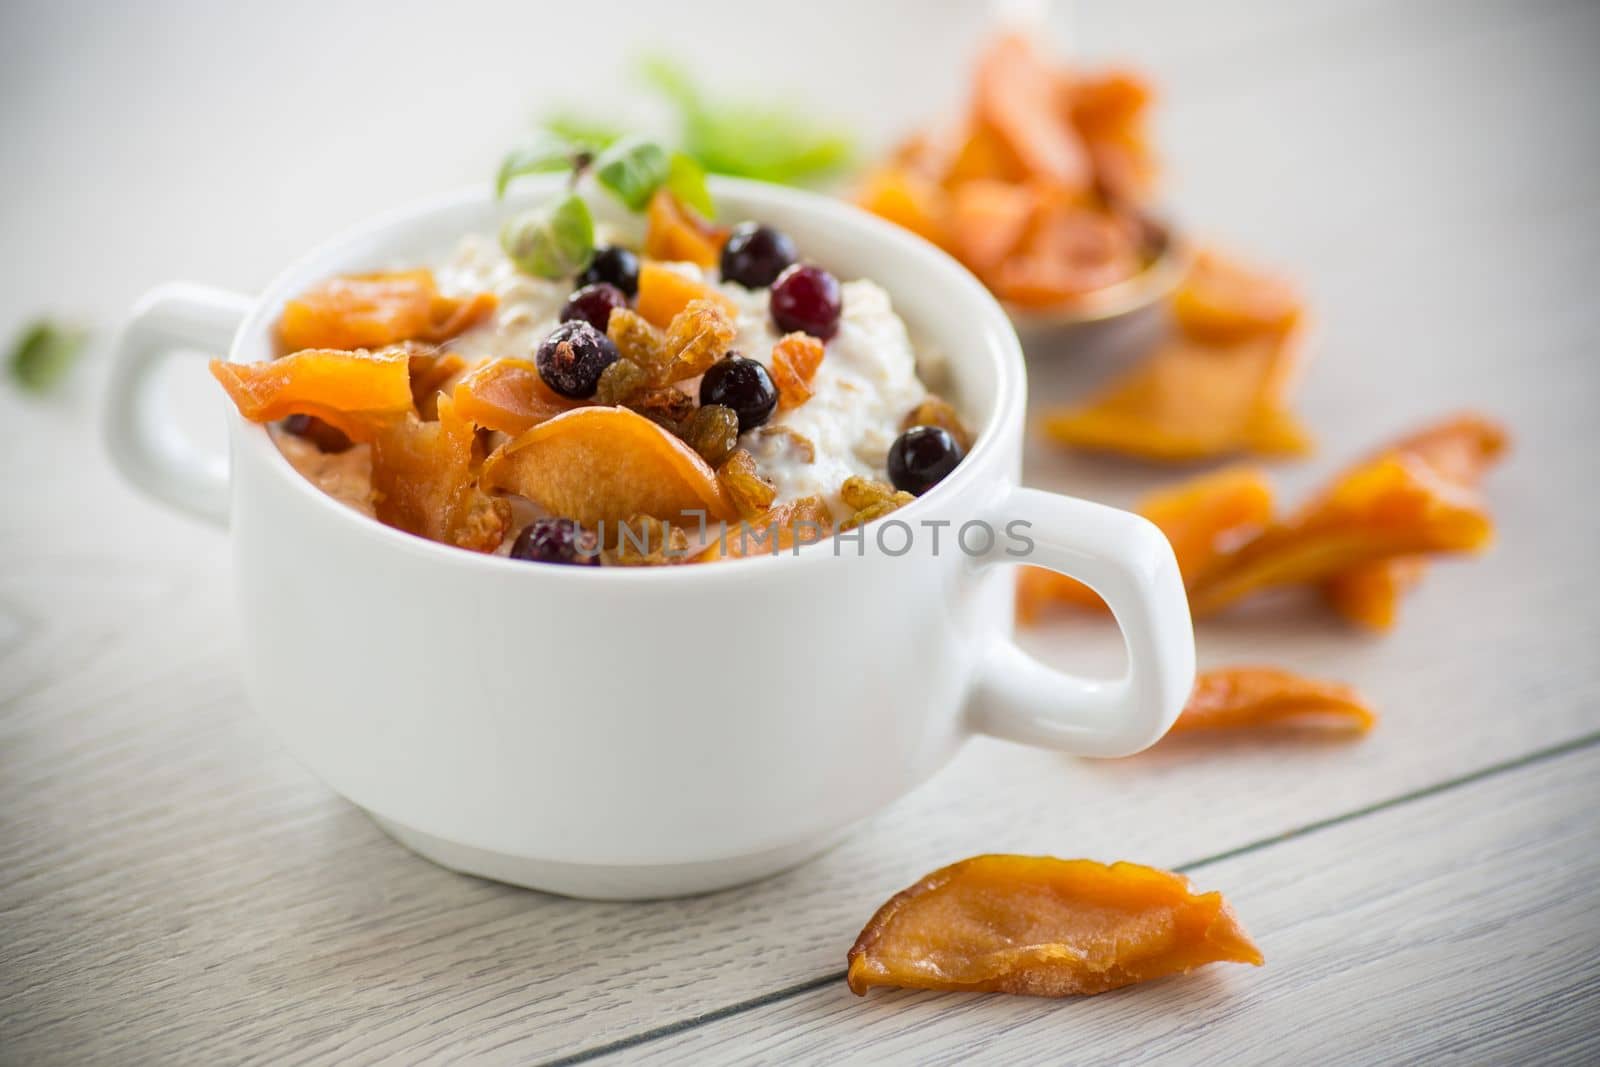 oatmeal with candied fruits, raisins in a plate by Rawlik